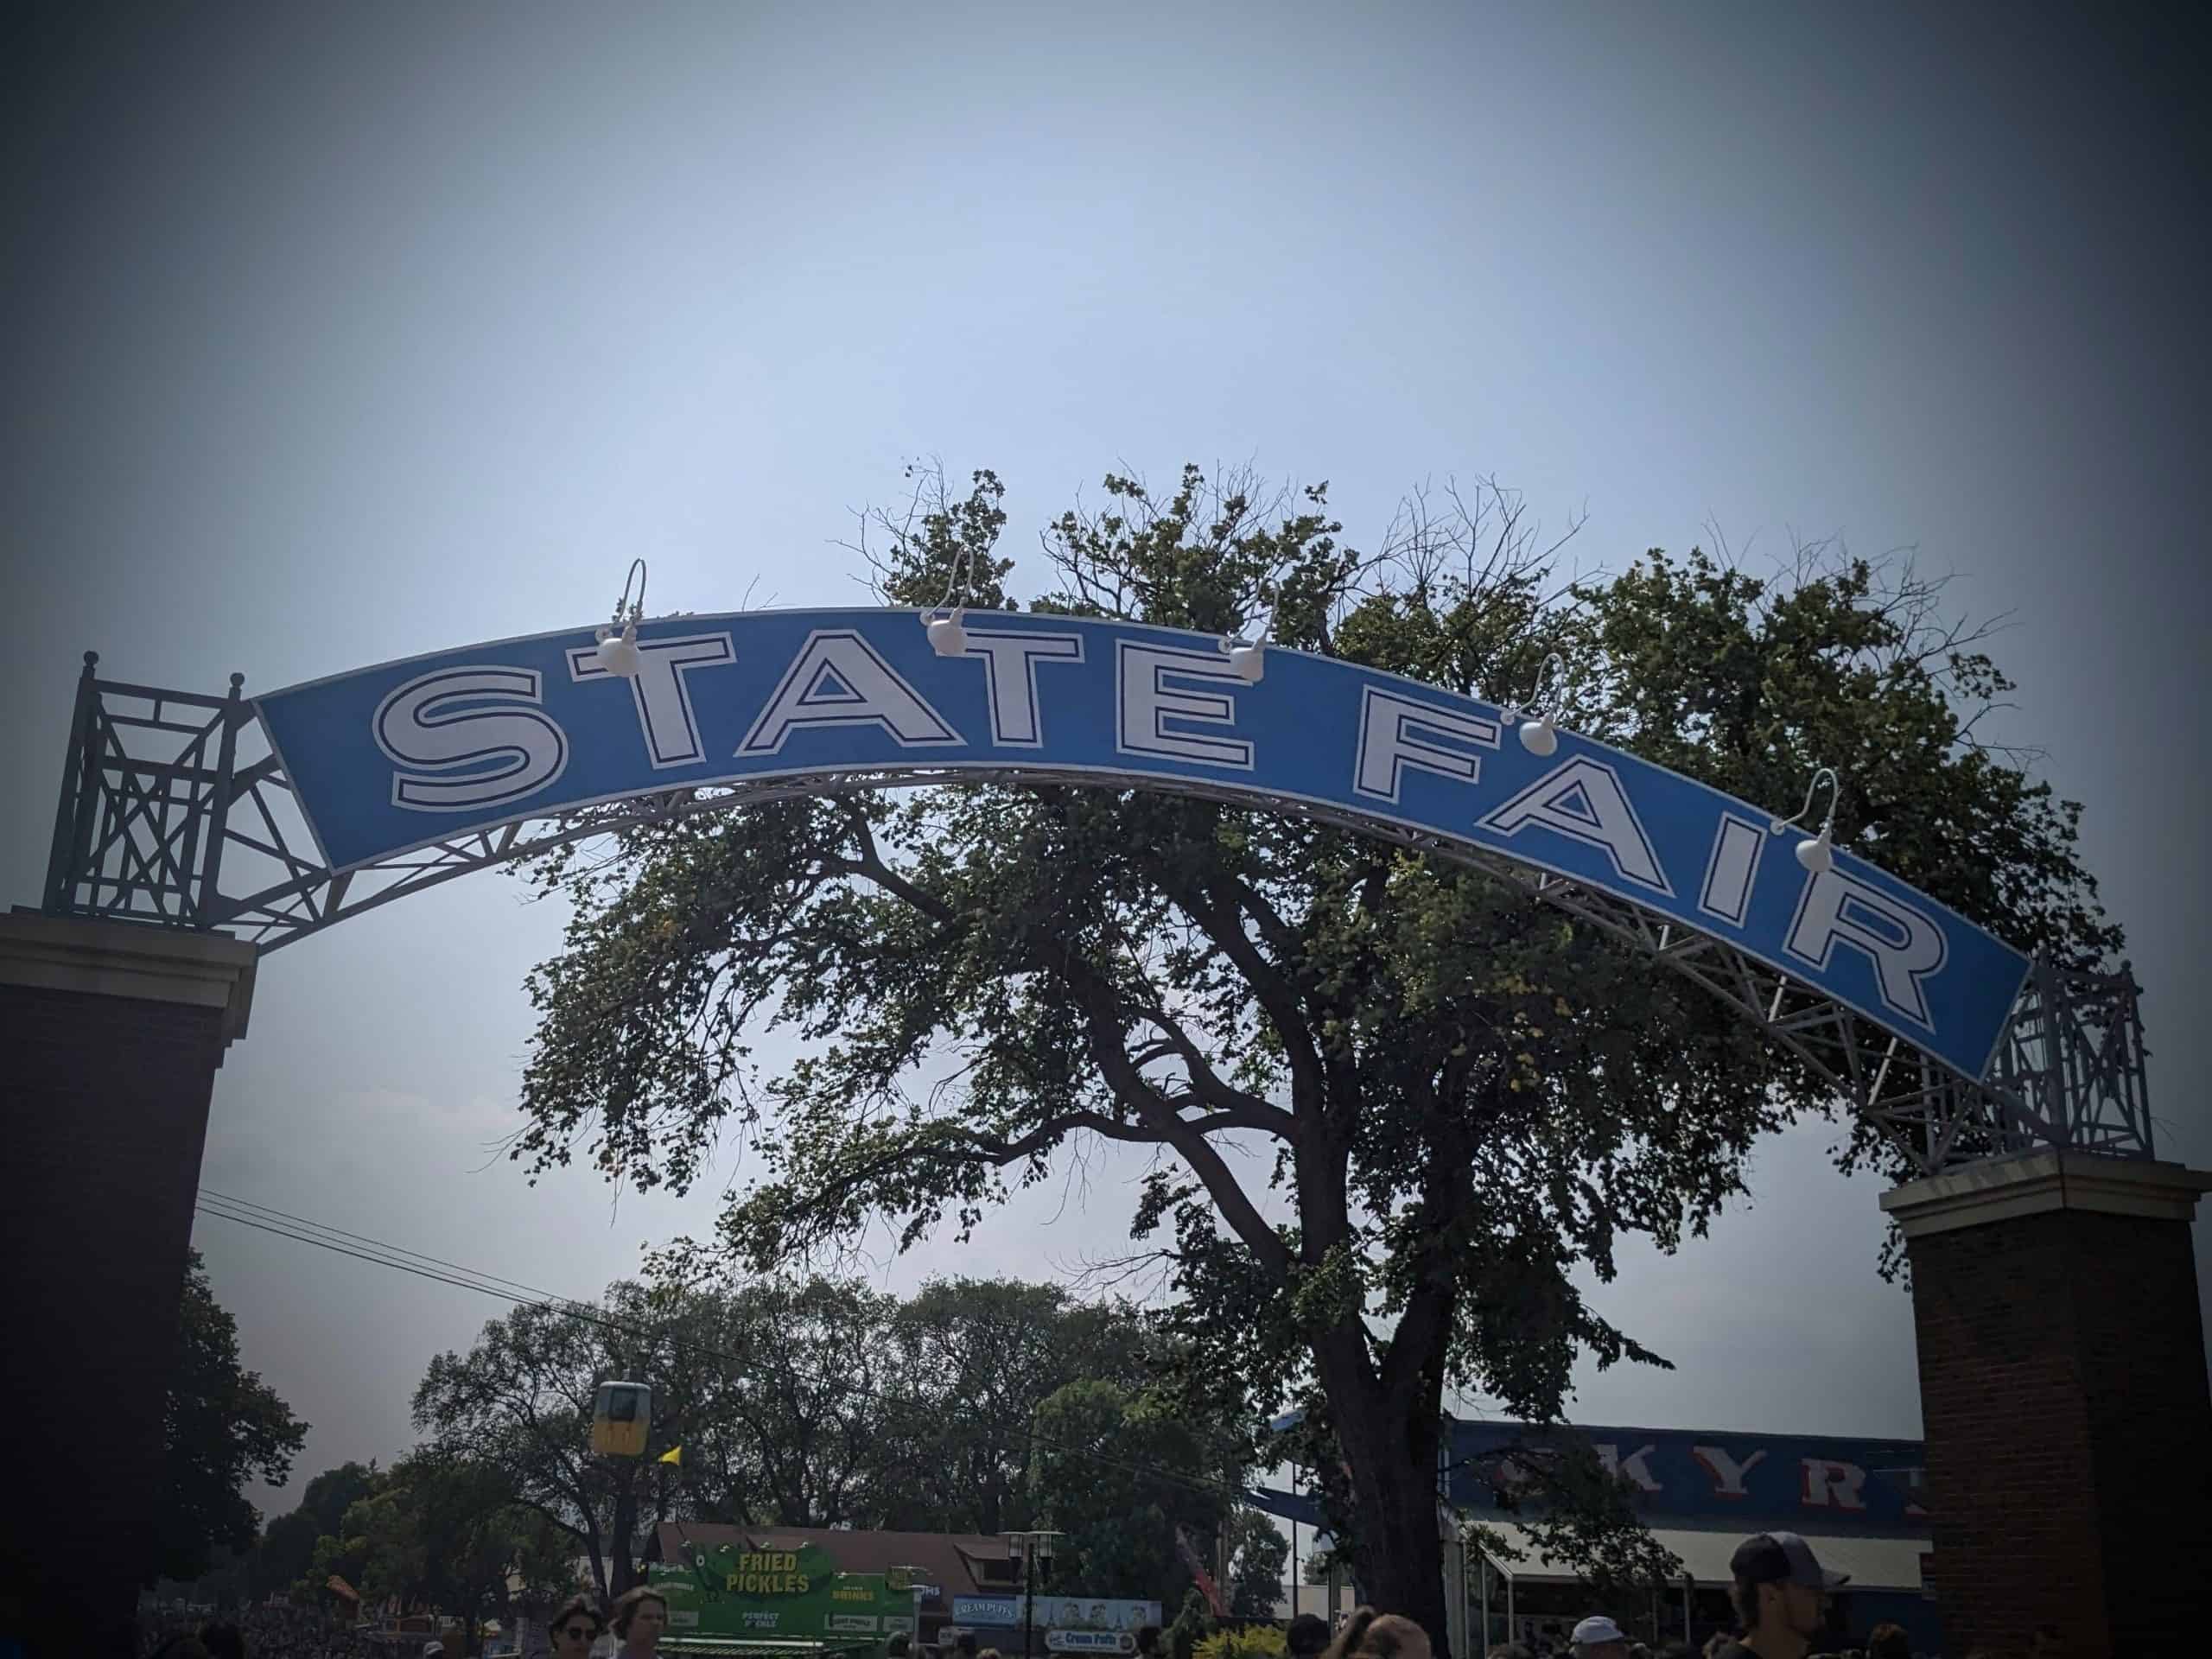 "State Fair" sign at the entrance to the Minnesota State Fair